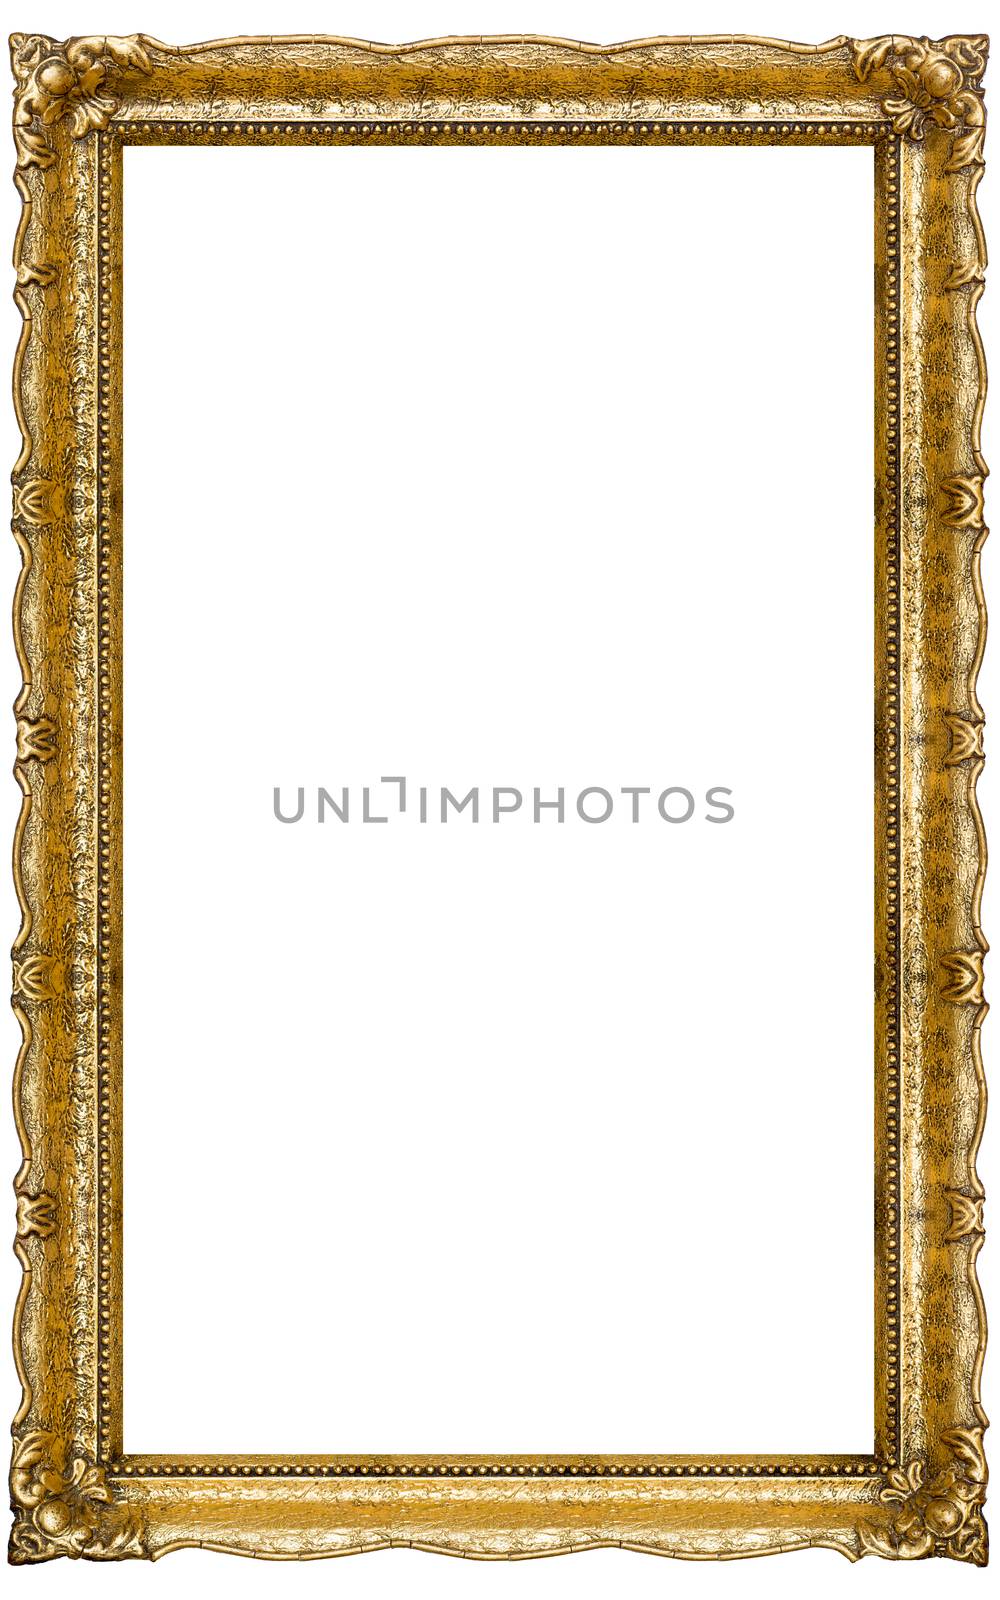 Verry Big Old Gold picture frame, isolated on white - extra large file and quality - 90mpx